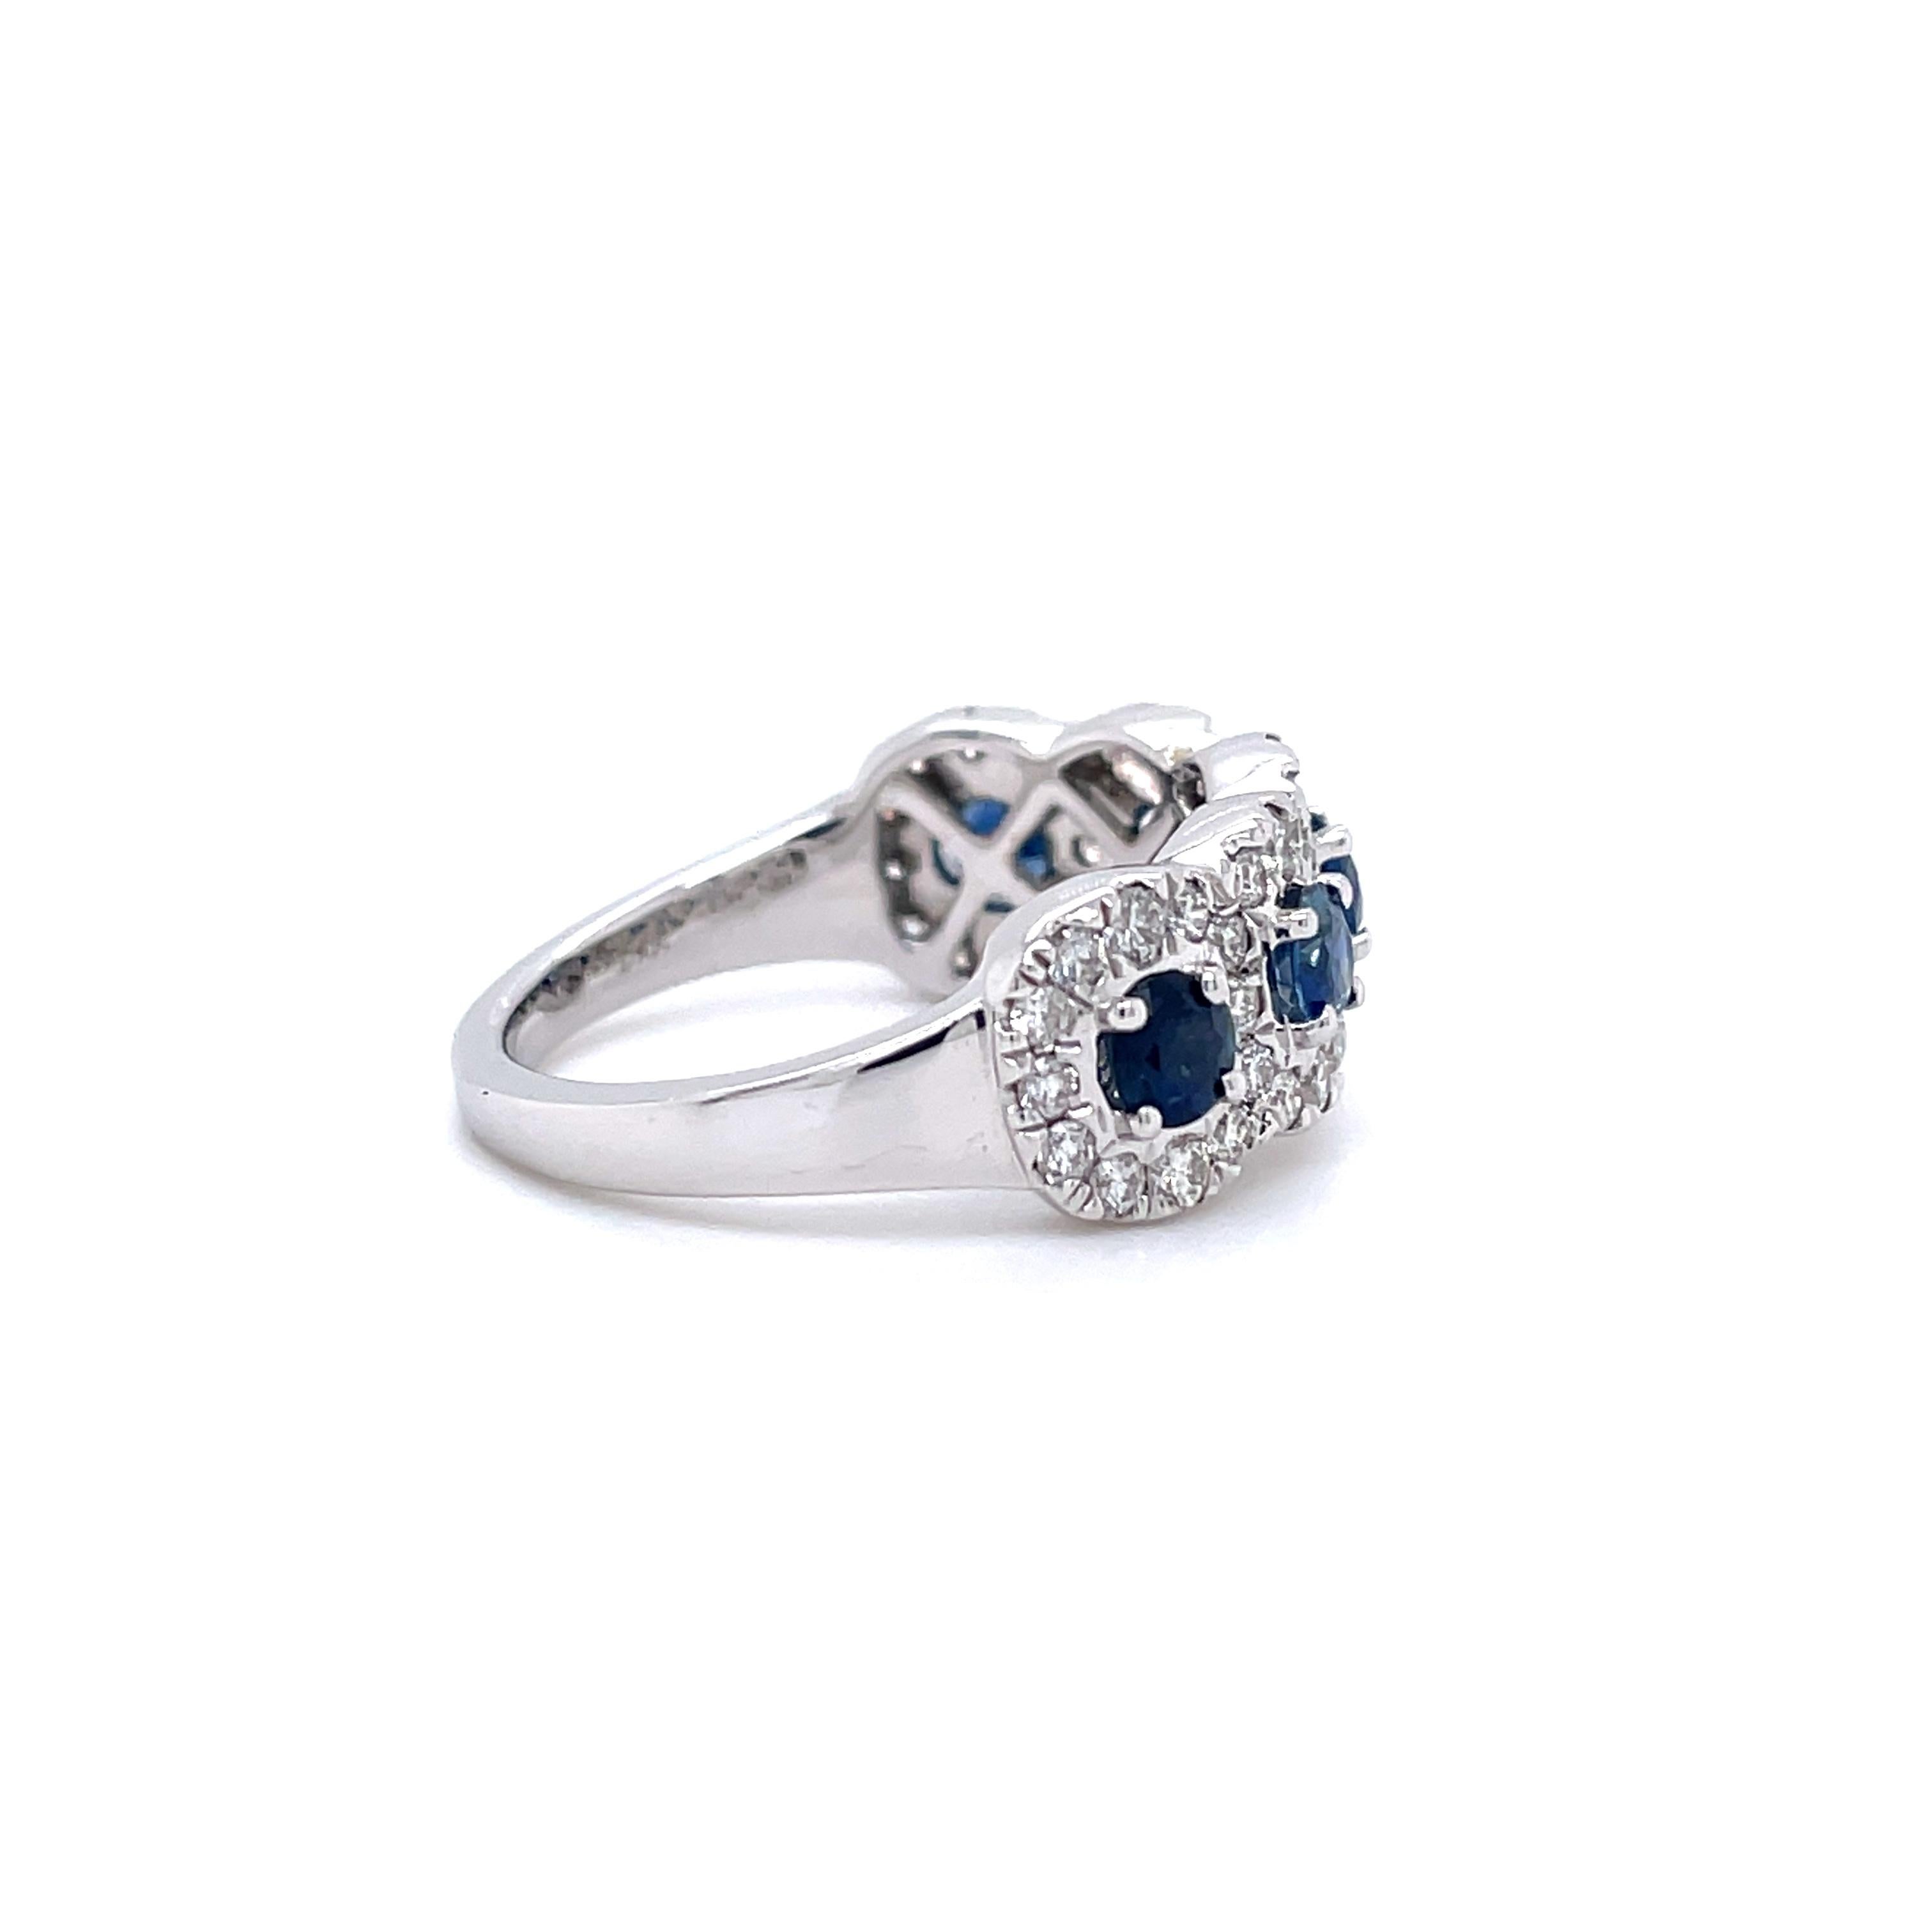 A stunning cocktail ring crafted in 14 karat white gold with 5 round natural blue sapphire stones, weighing 1.00 cttw. The measurements for these stones are 3.20 x 3.40 mm. This ring also contains 48 natural round brilliant diamonds weighing 0.67